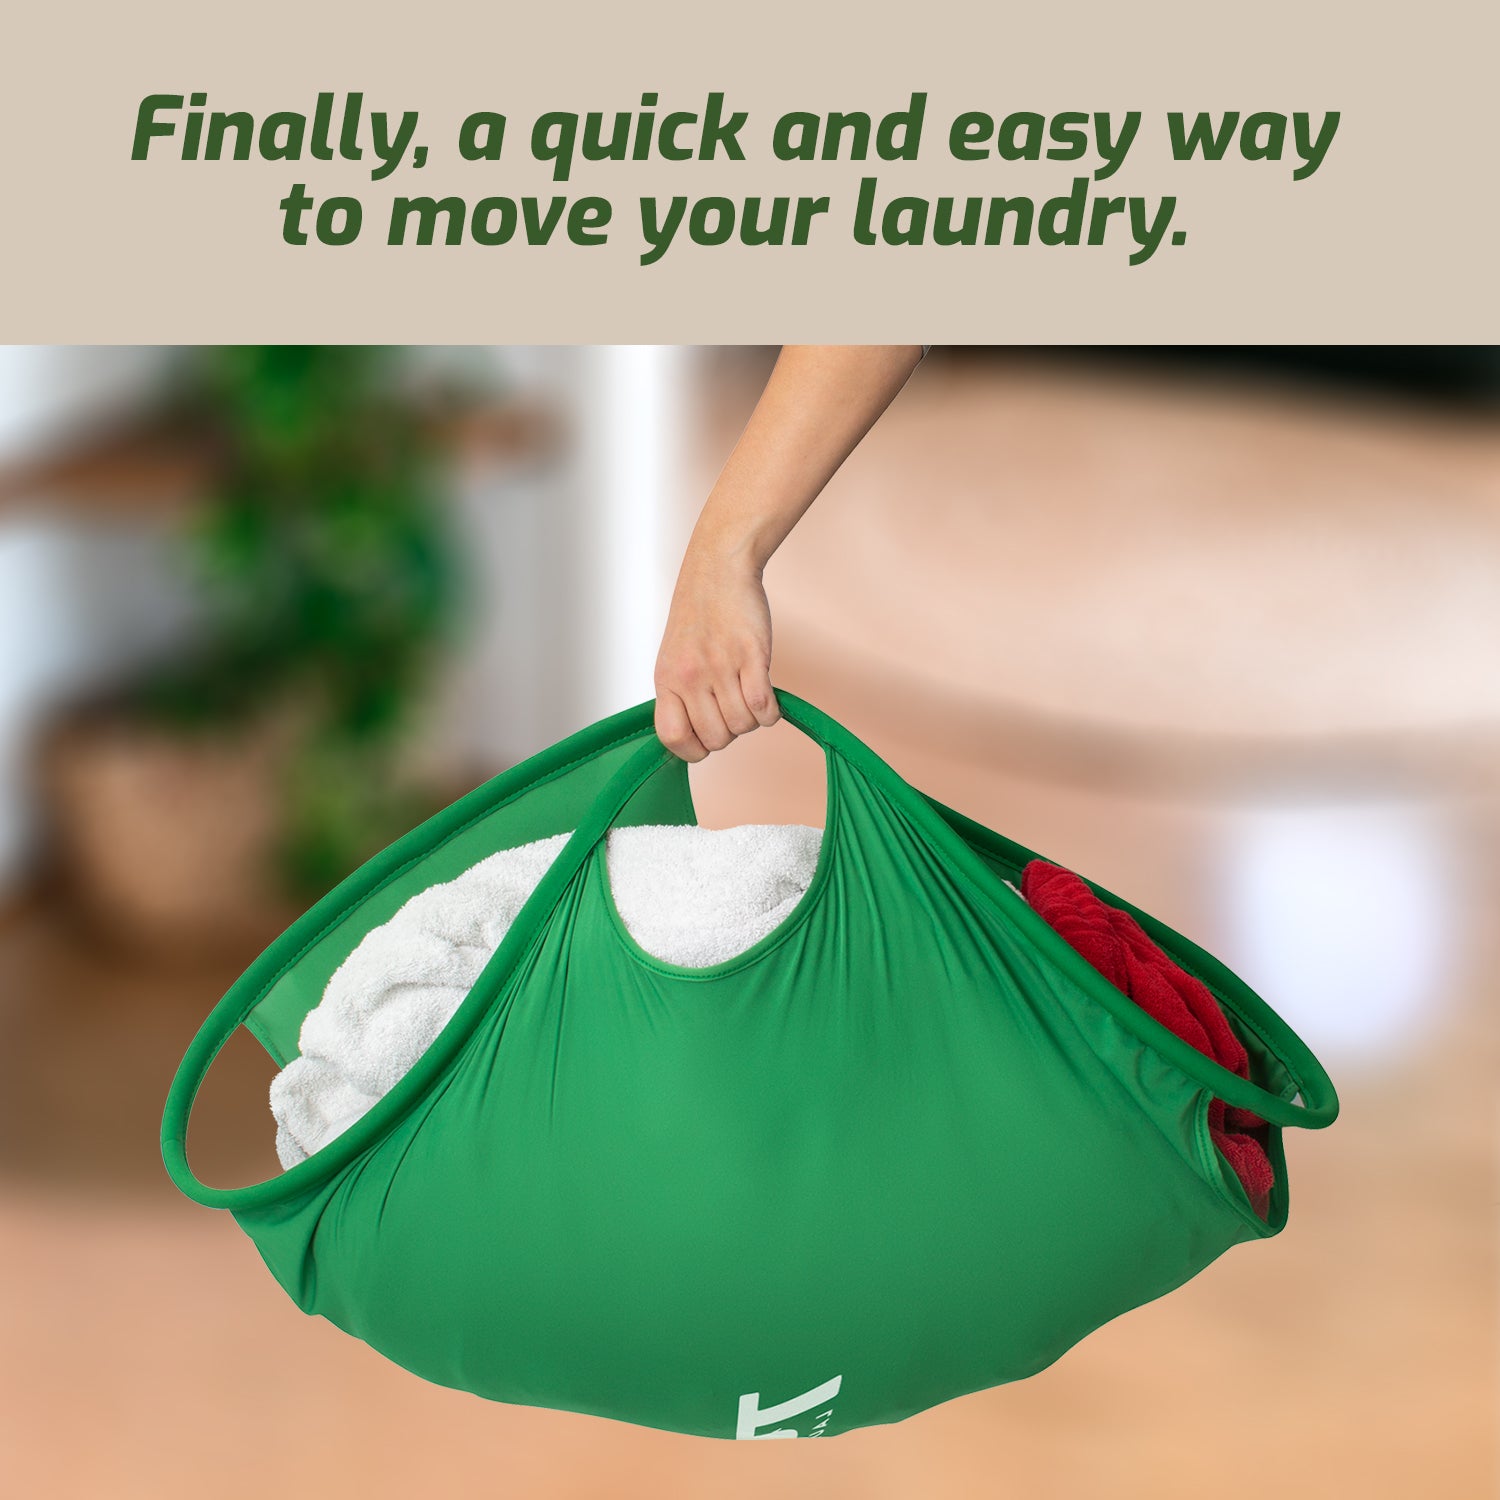 Laundry Turtle - How to close it? 